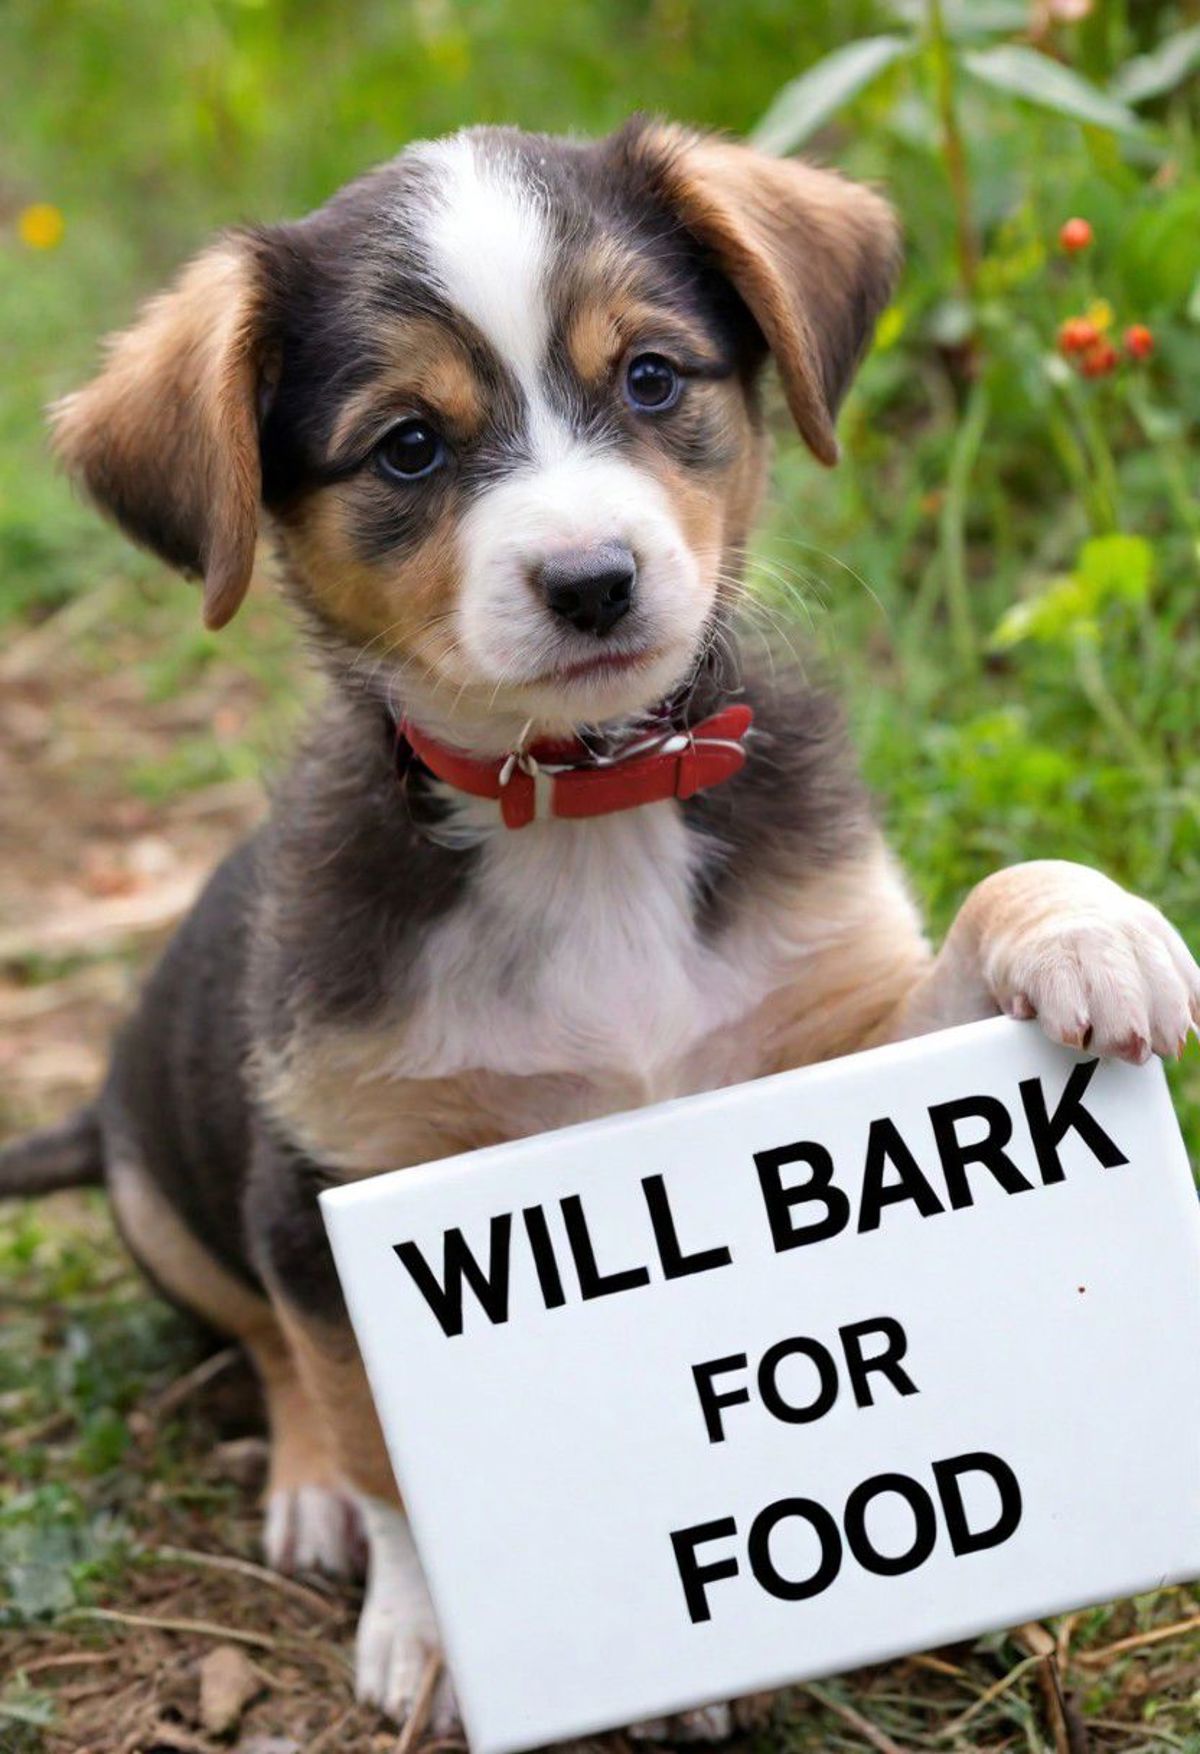 Cute Puppy Holding a Sign that Says "Will Bark for Food"